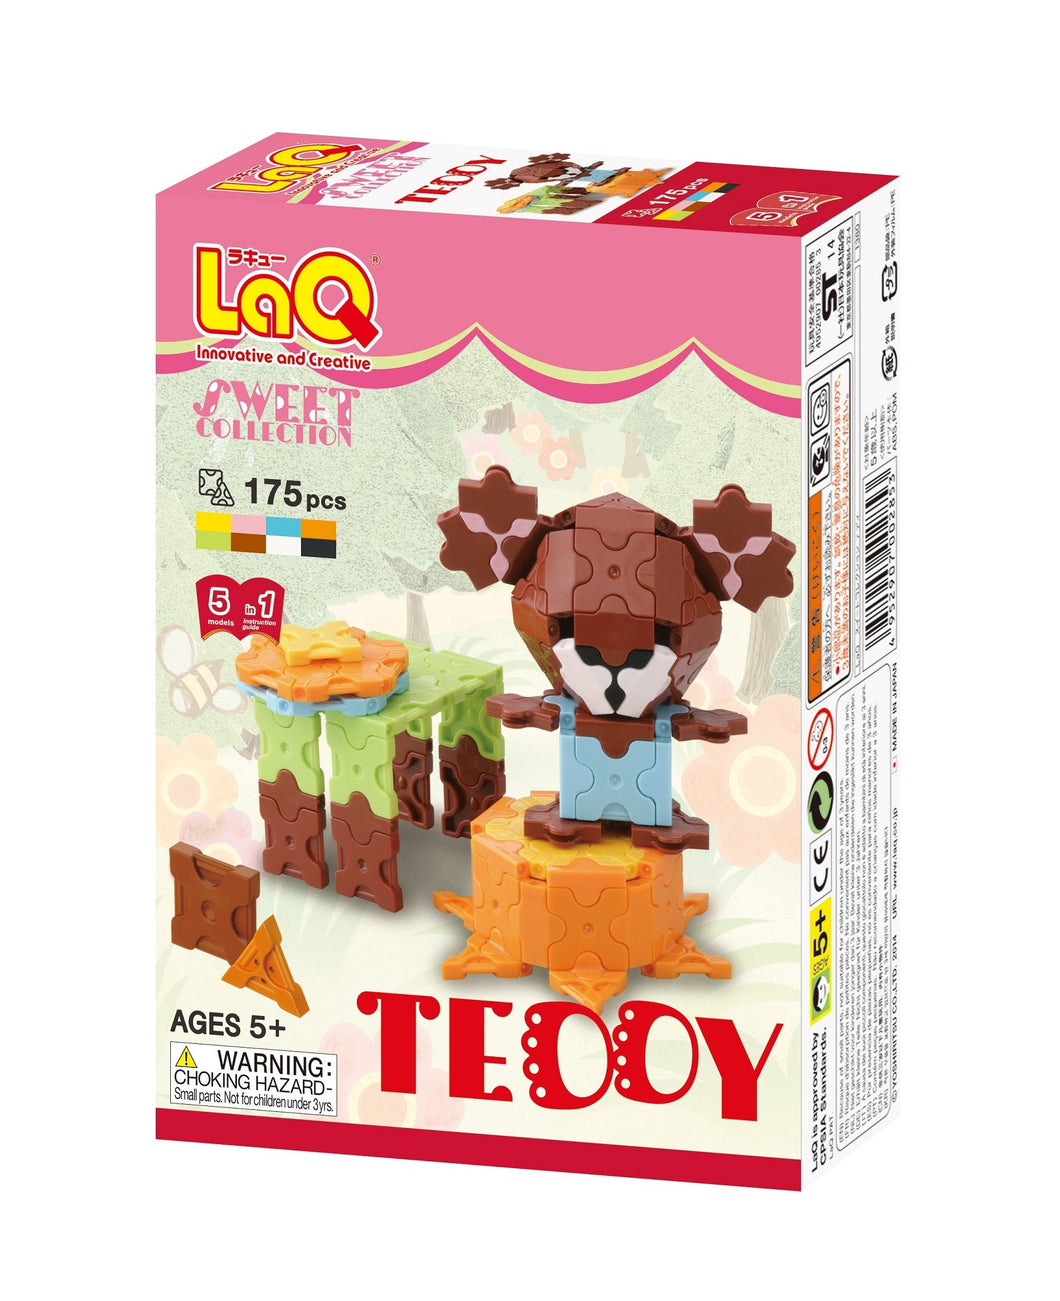 Package front side featured in the LaQ sweet collection teddy set